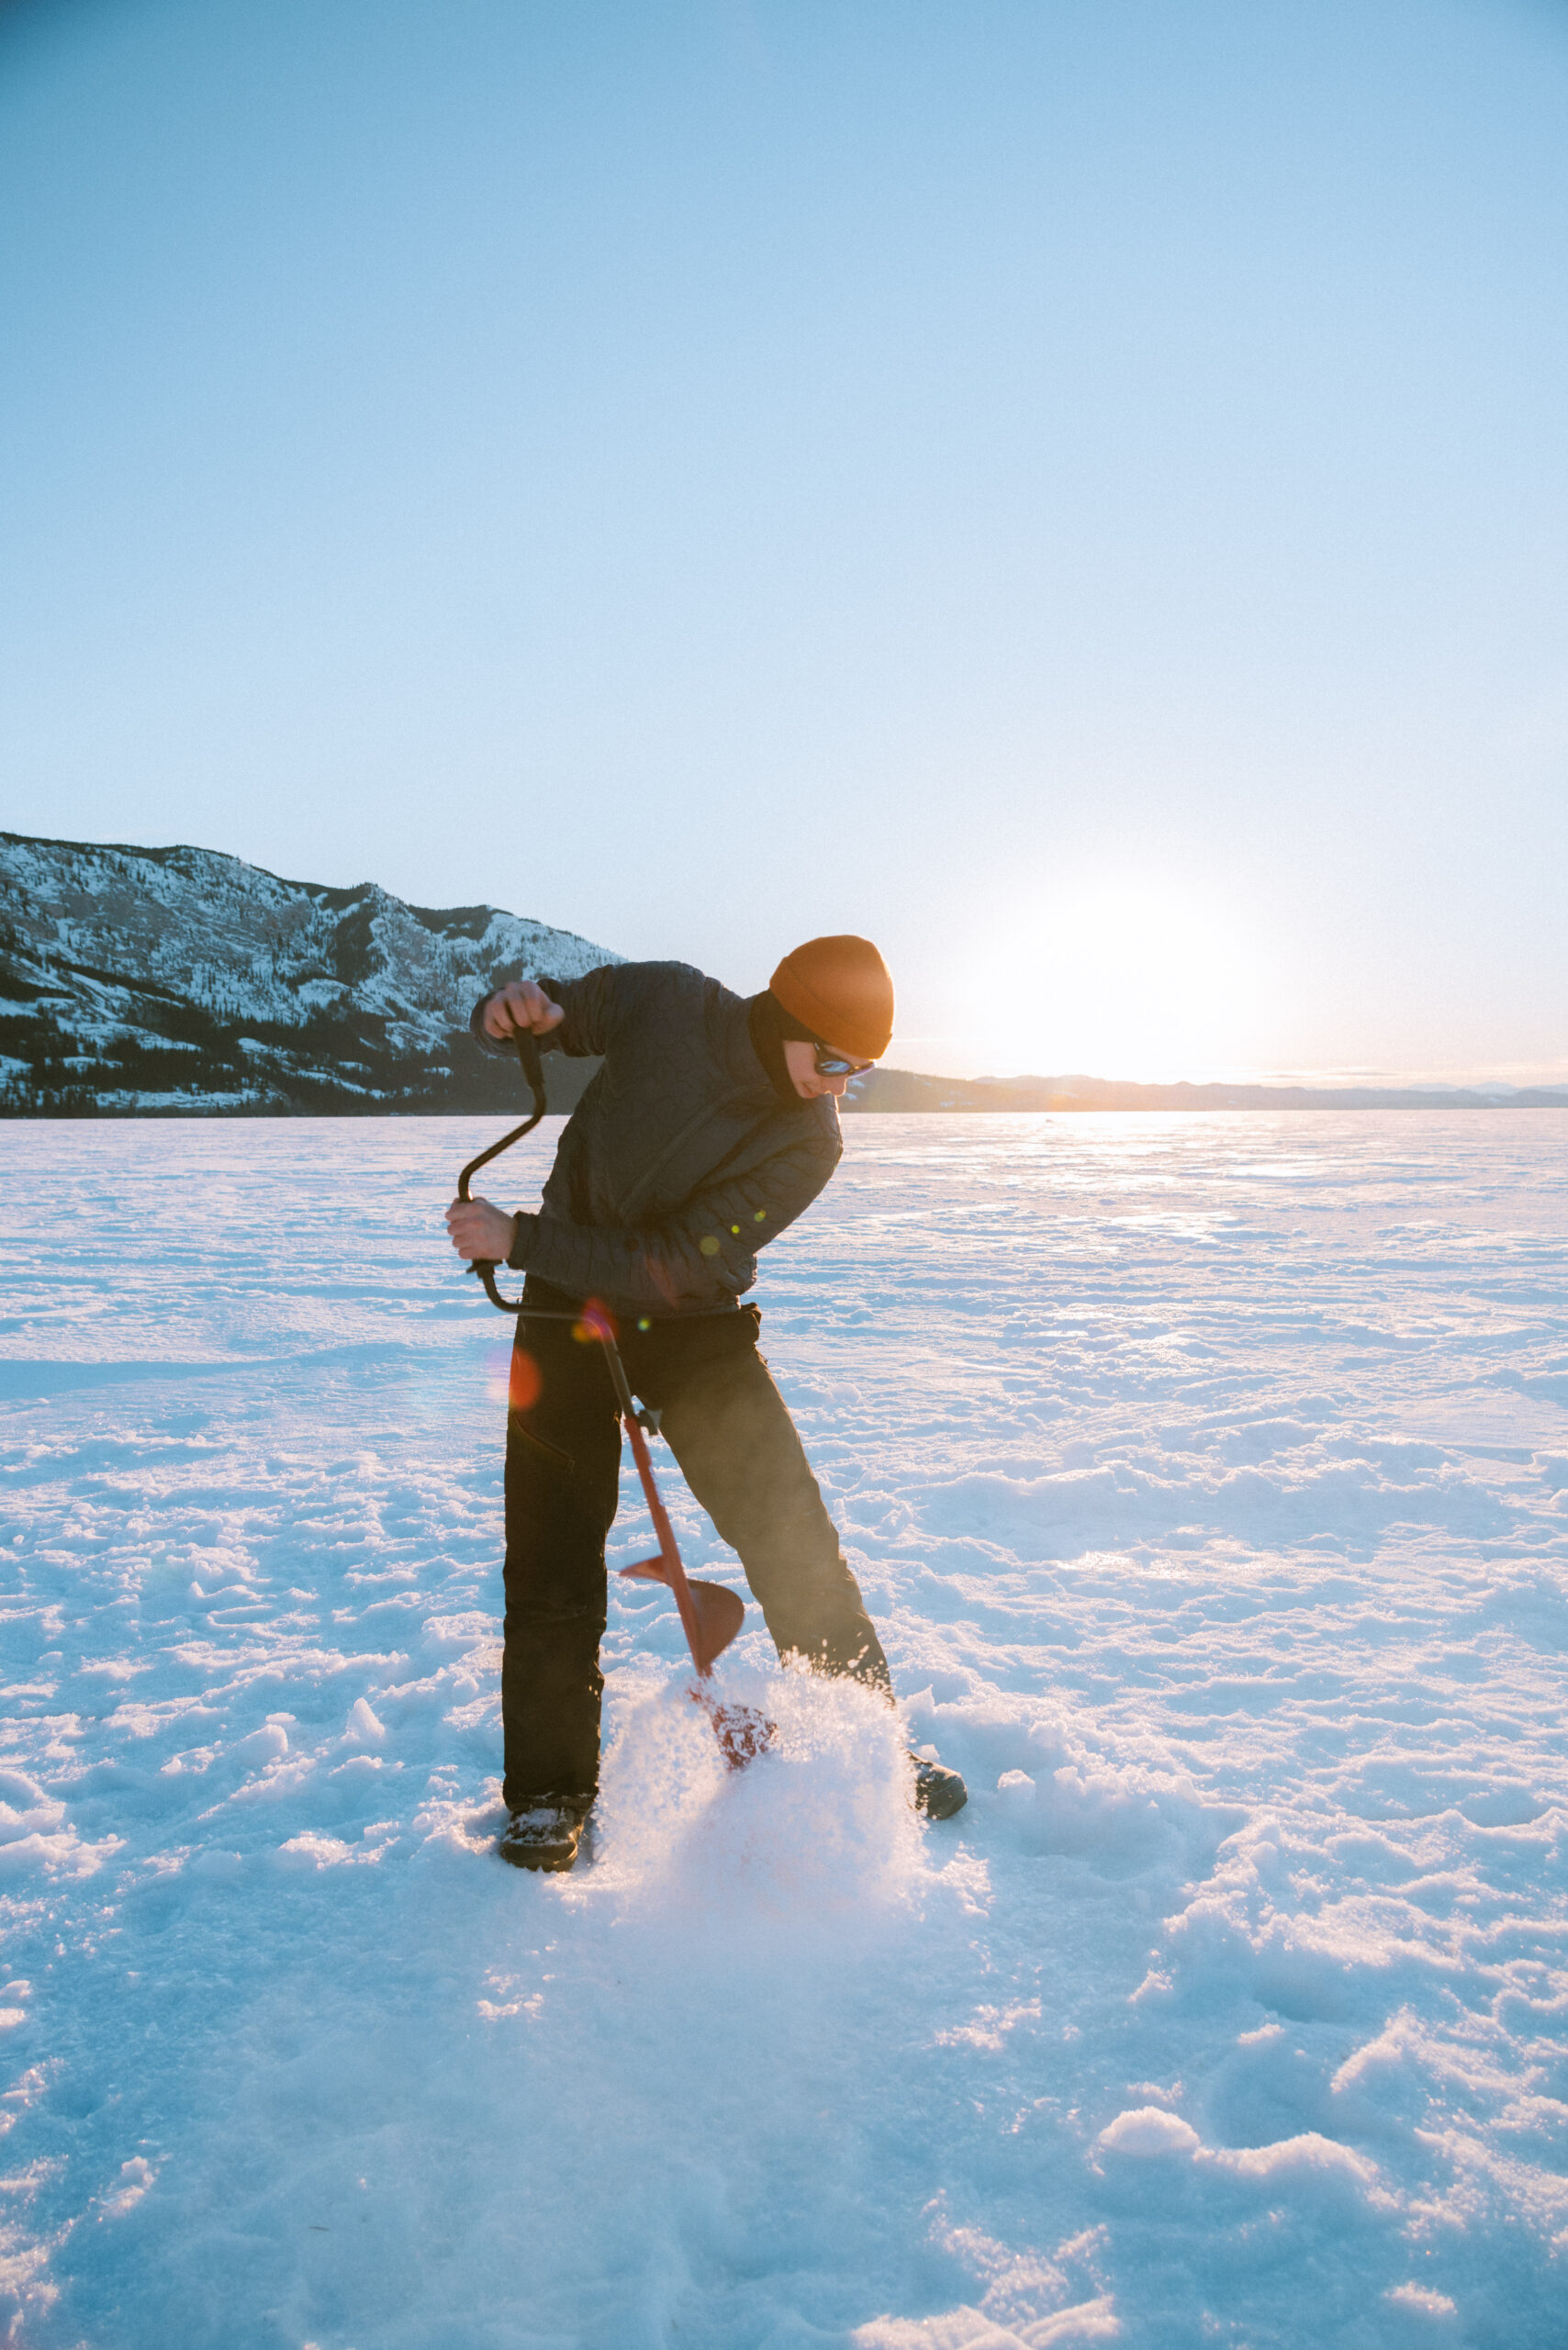 Man ice fishing in snow at sunset